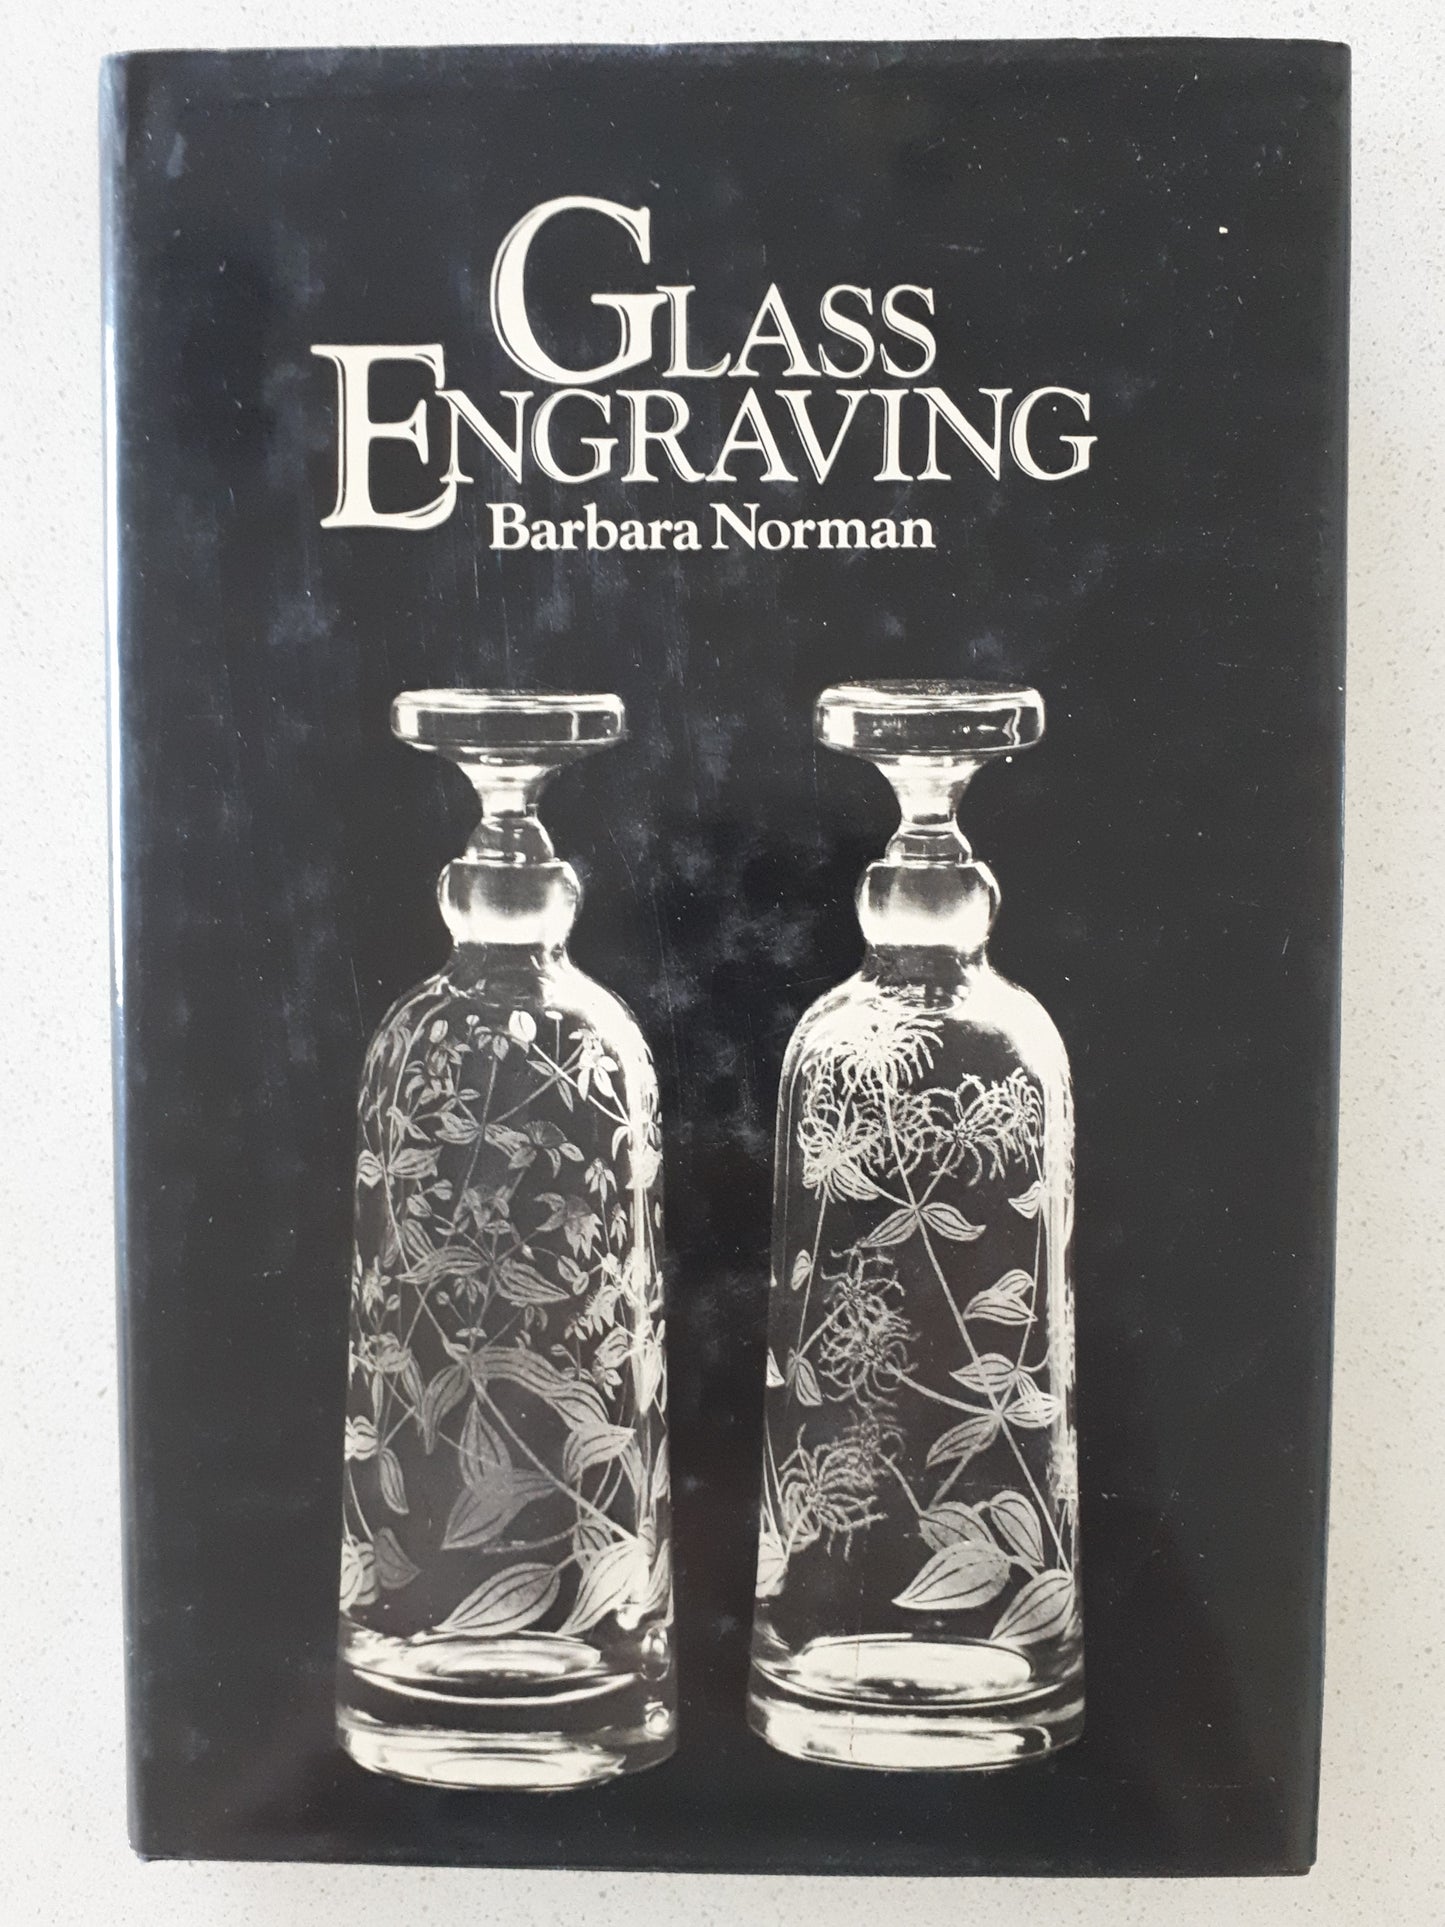 Glass Engraving by Barbara Norman